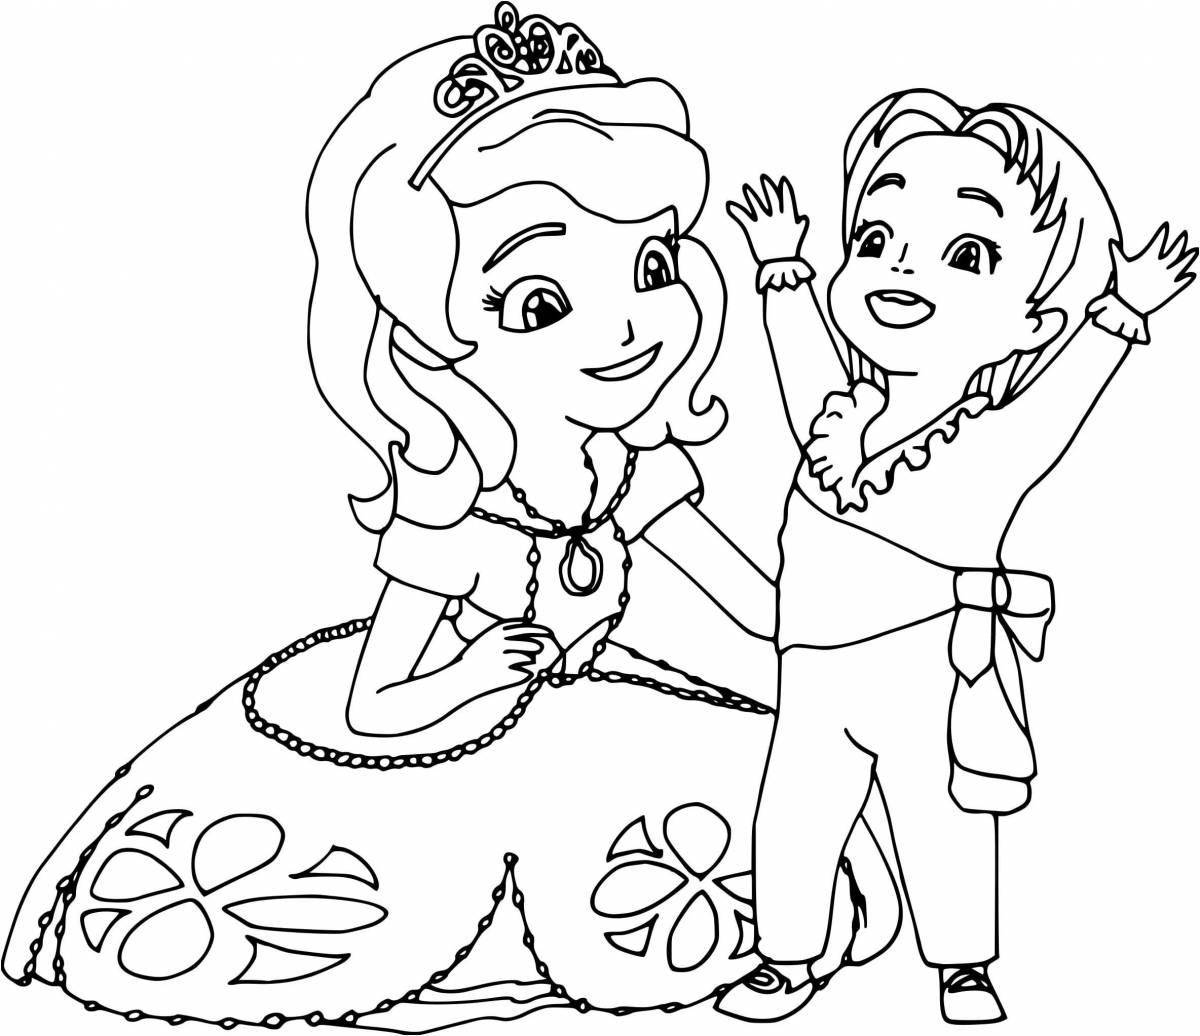 Great coloring book for boys and girls